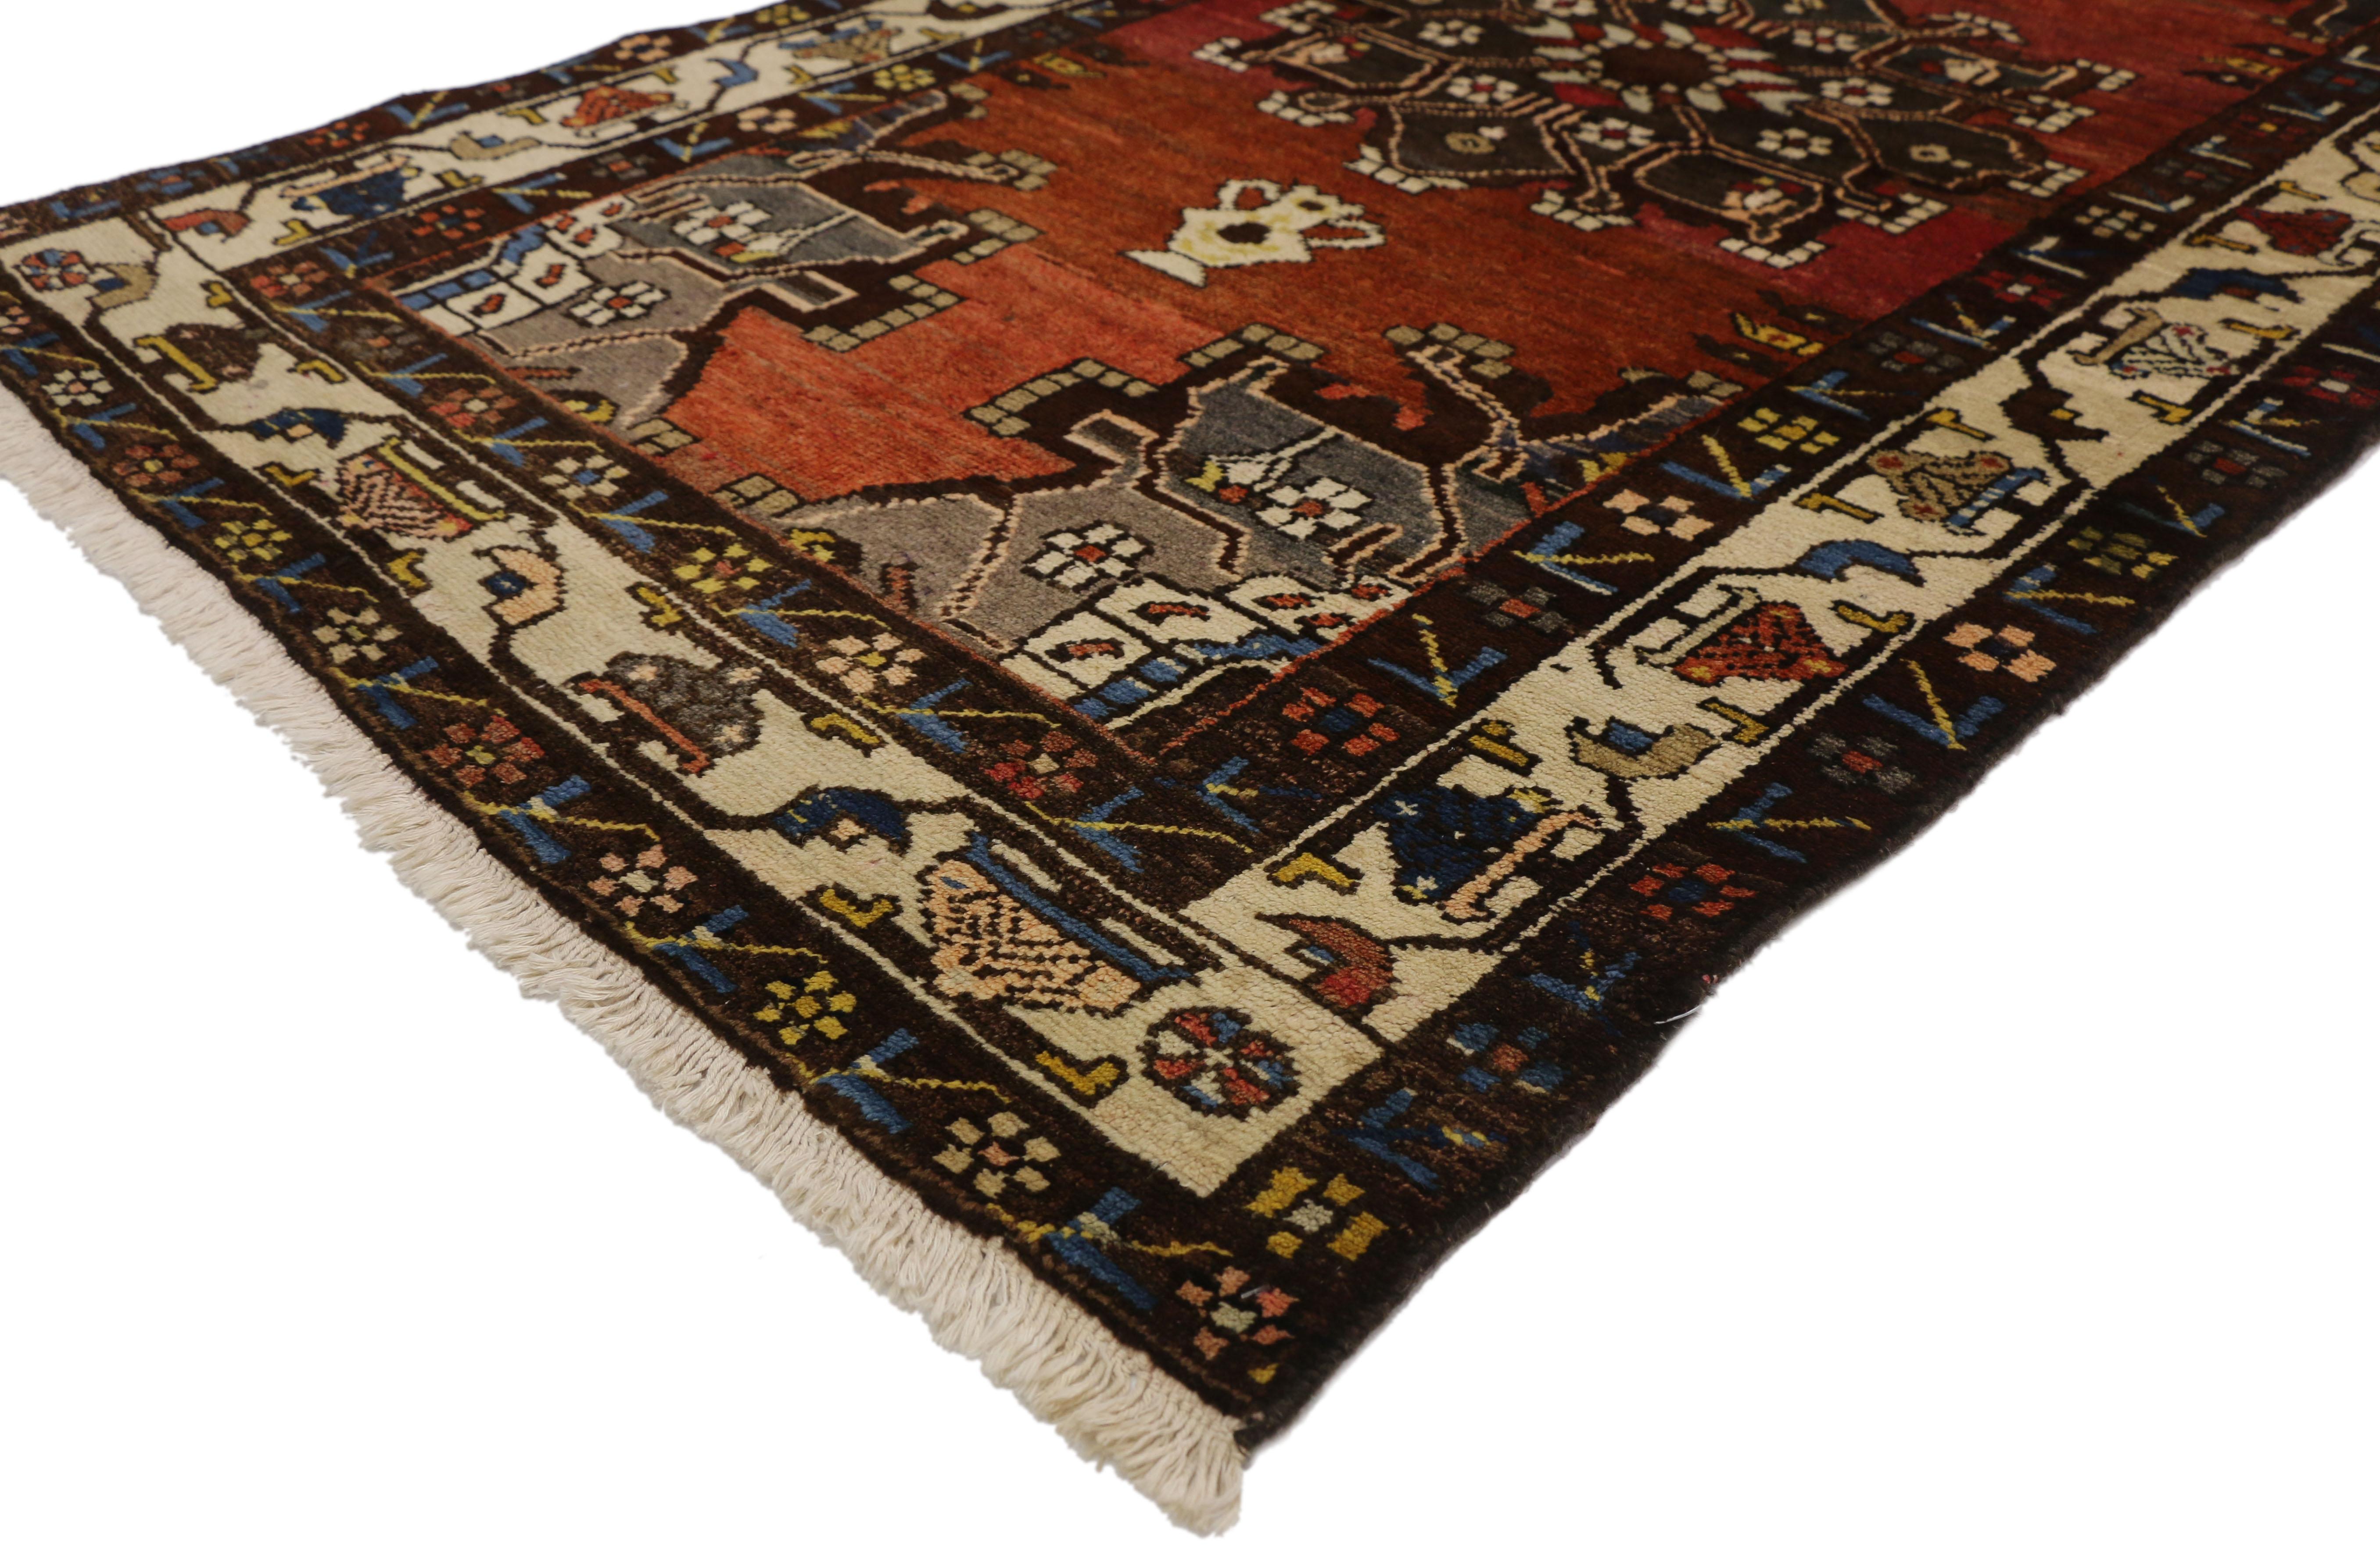 75234,Vintage Persian Hamadan Accent Rug for Foyer, Kitchen, Bathroom, or Entry Rug. This hand-knotted wool vintage Hamadan Persian rug features a central stylized floral medallion in chocolate brown with a Persian vase on each side floating in a